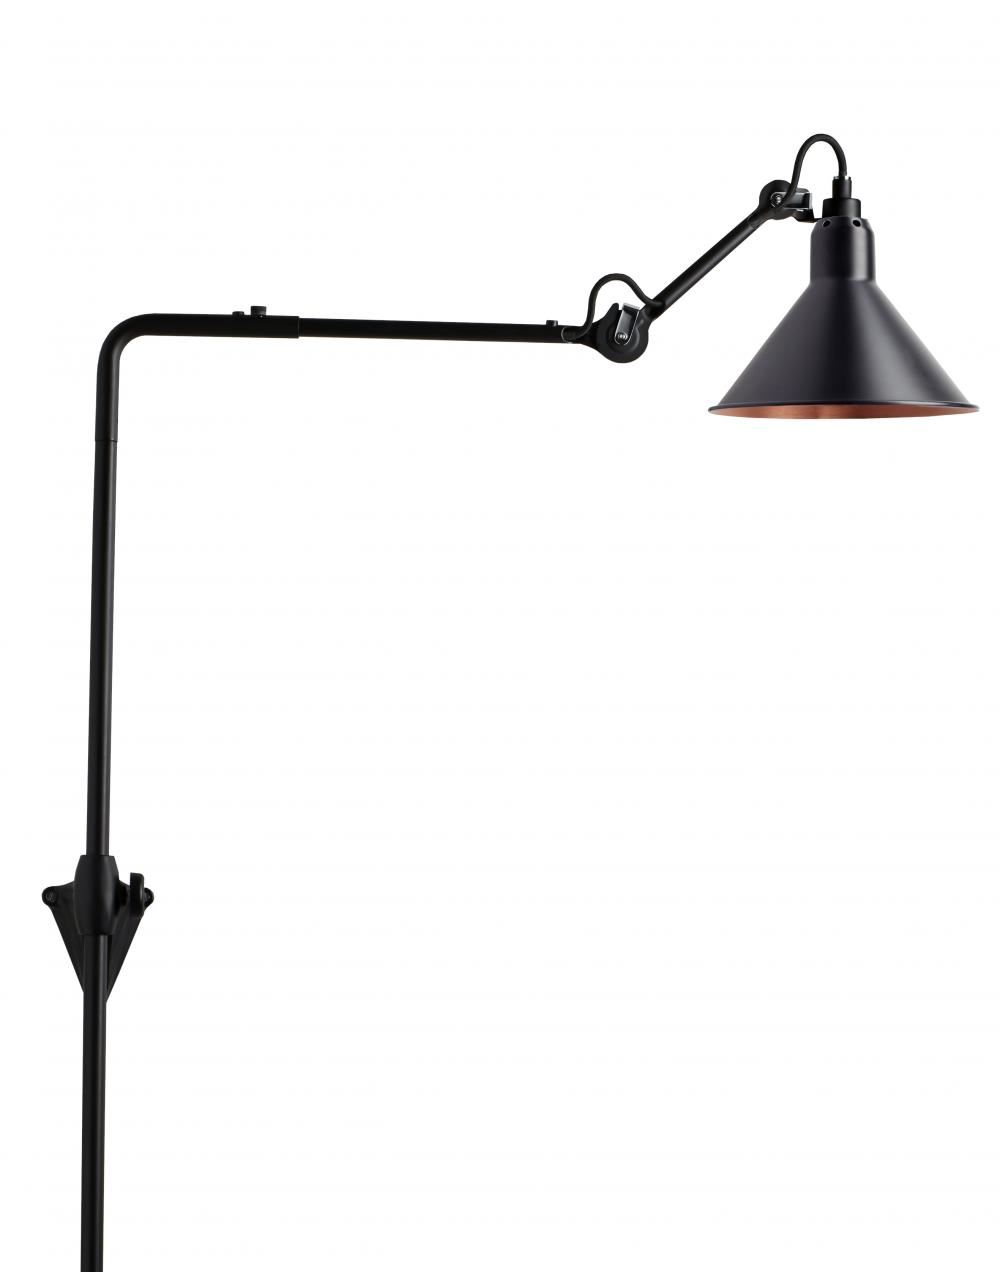 Lampe Gras 216 Wall Light Black Shade With Copper Interior Conic Shade